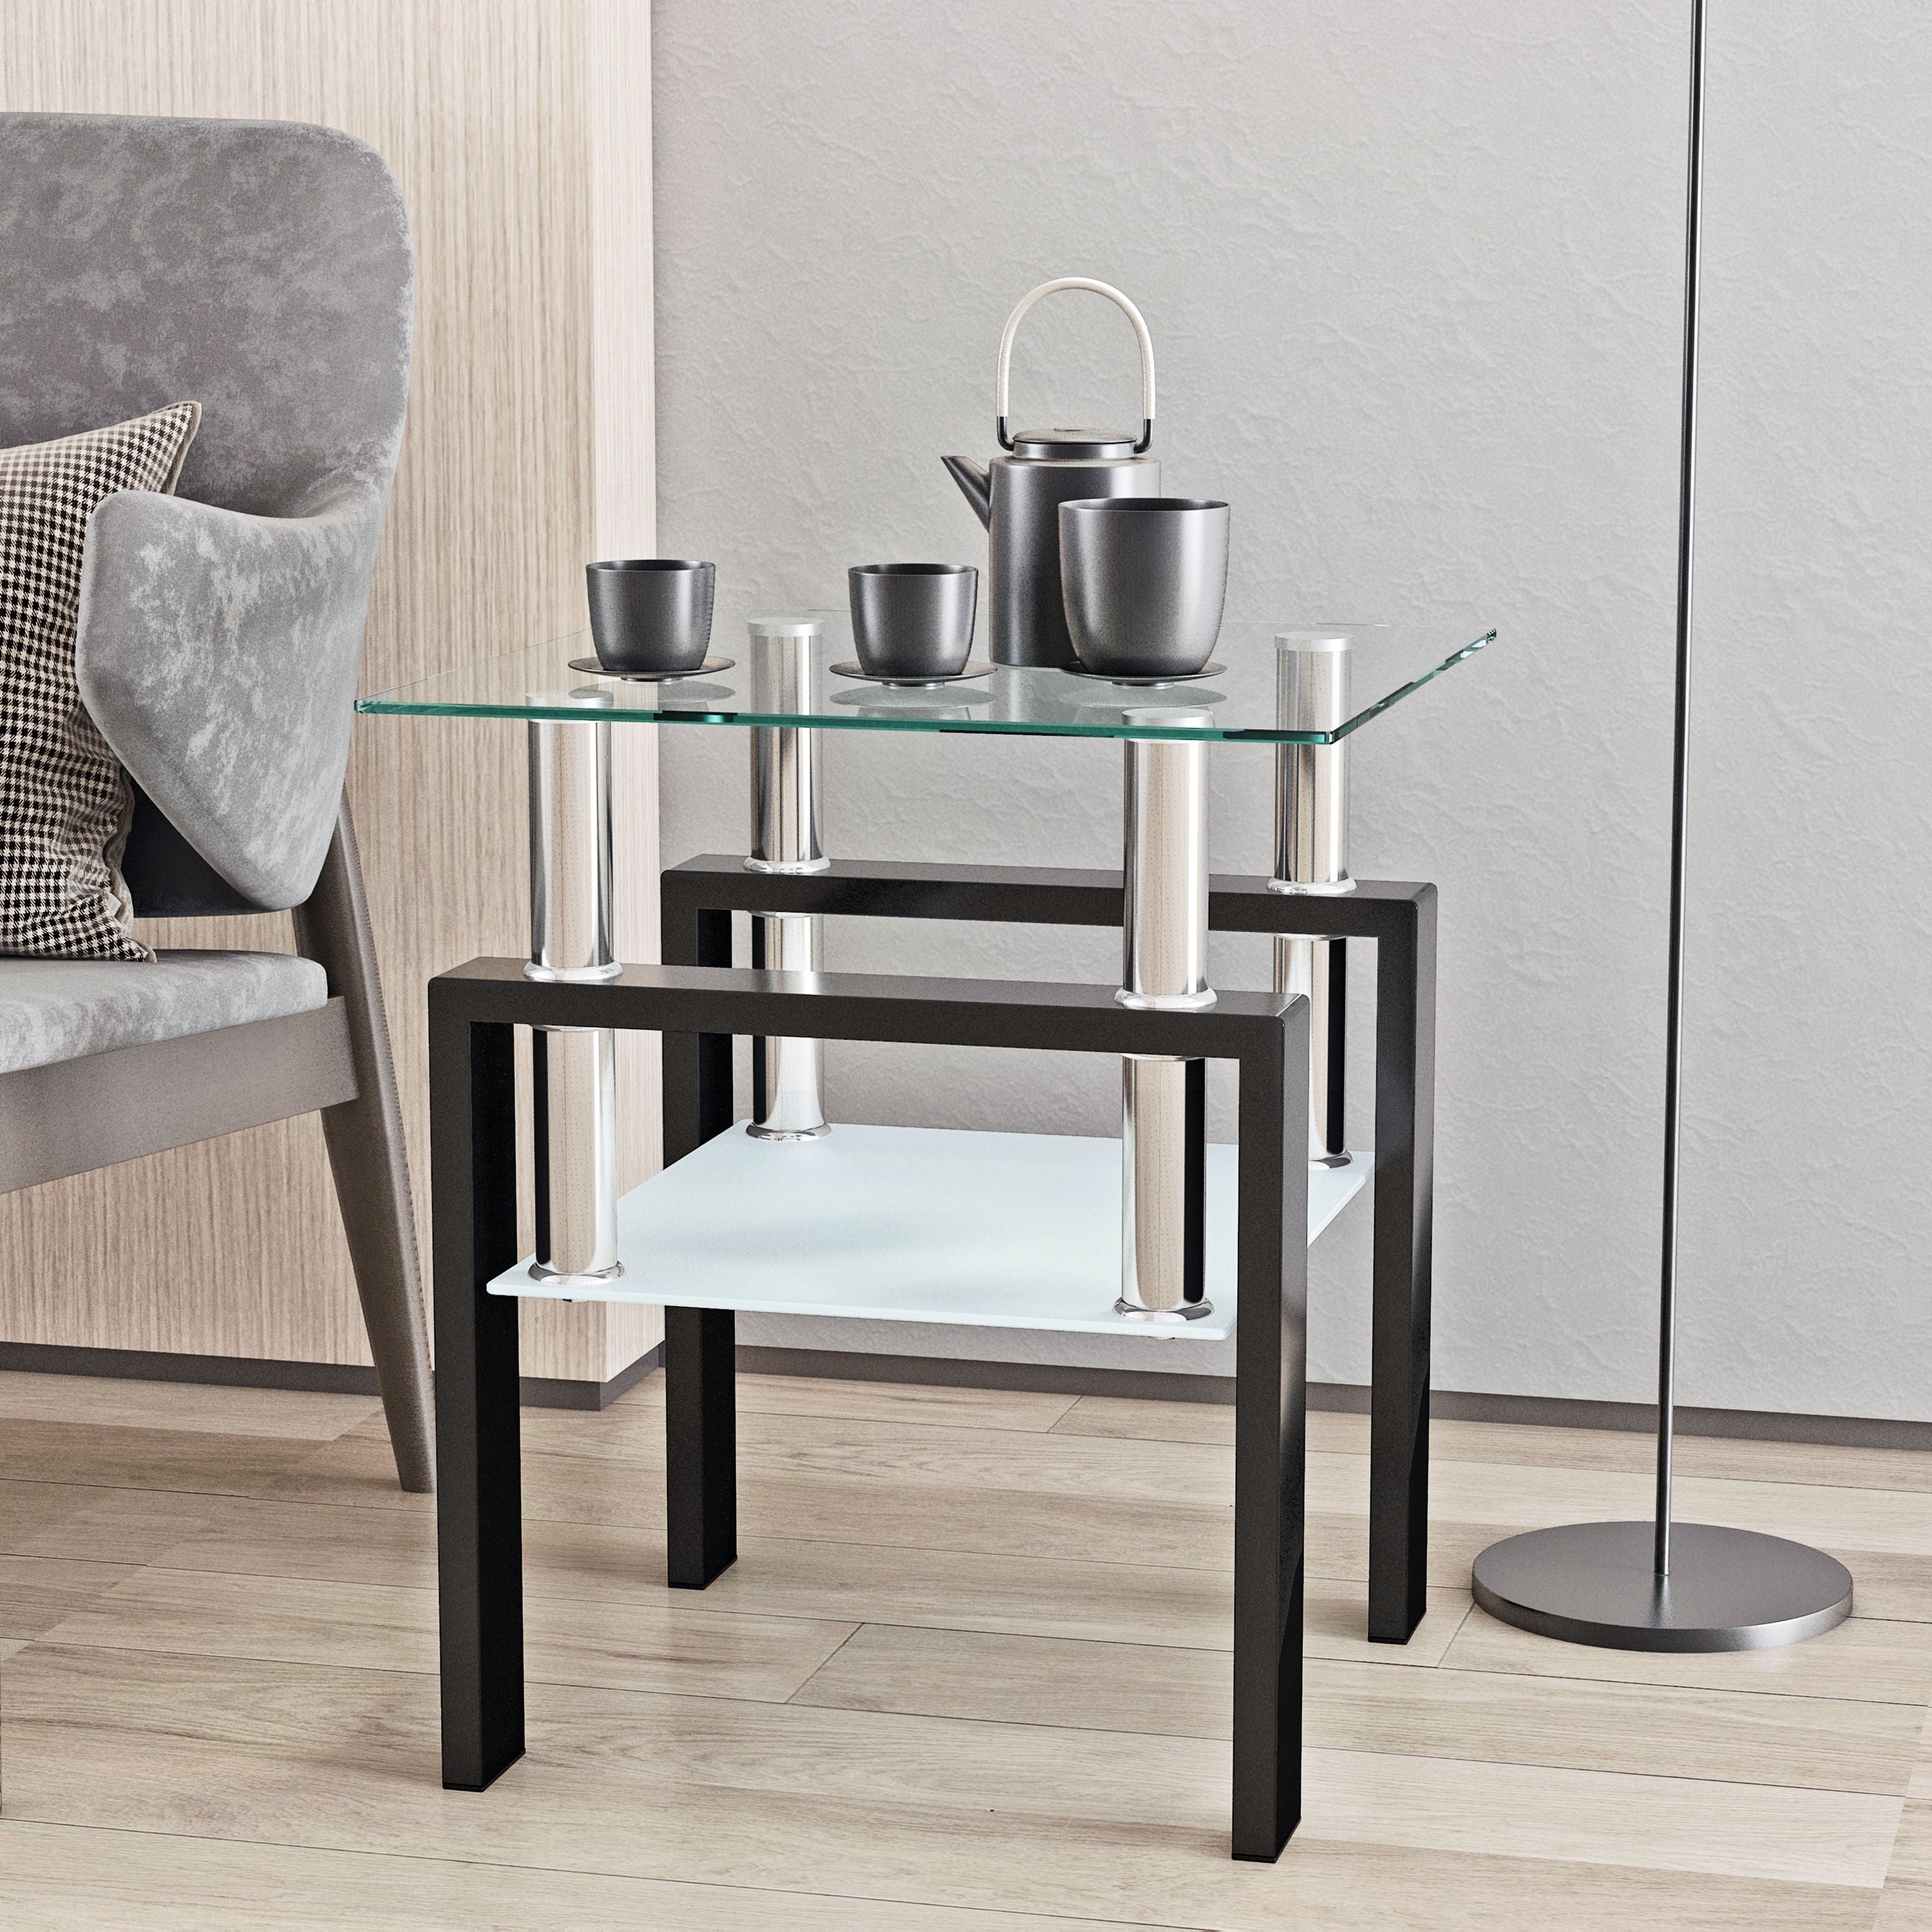 1-Piece Modern Tempered Glass Tea Table Coffee Table End Table, Square Table For Living Room, Transparent / Black